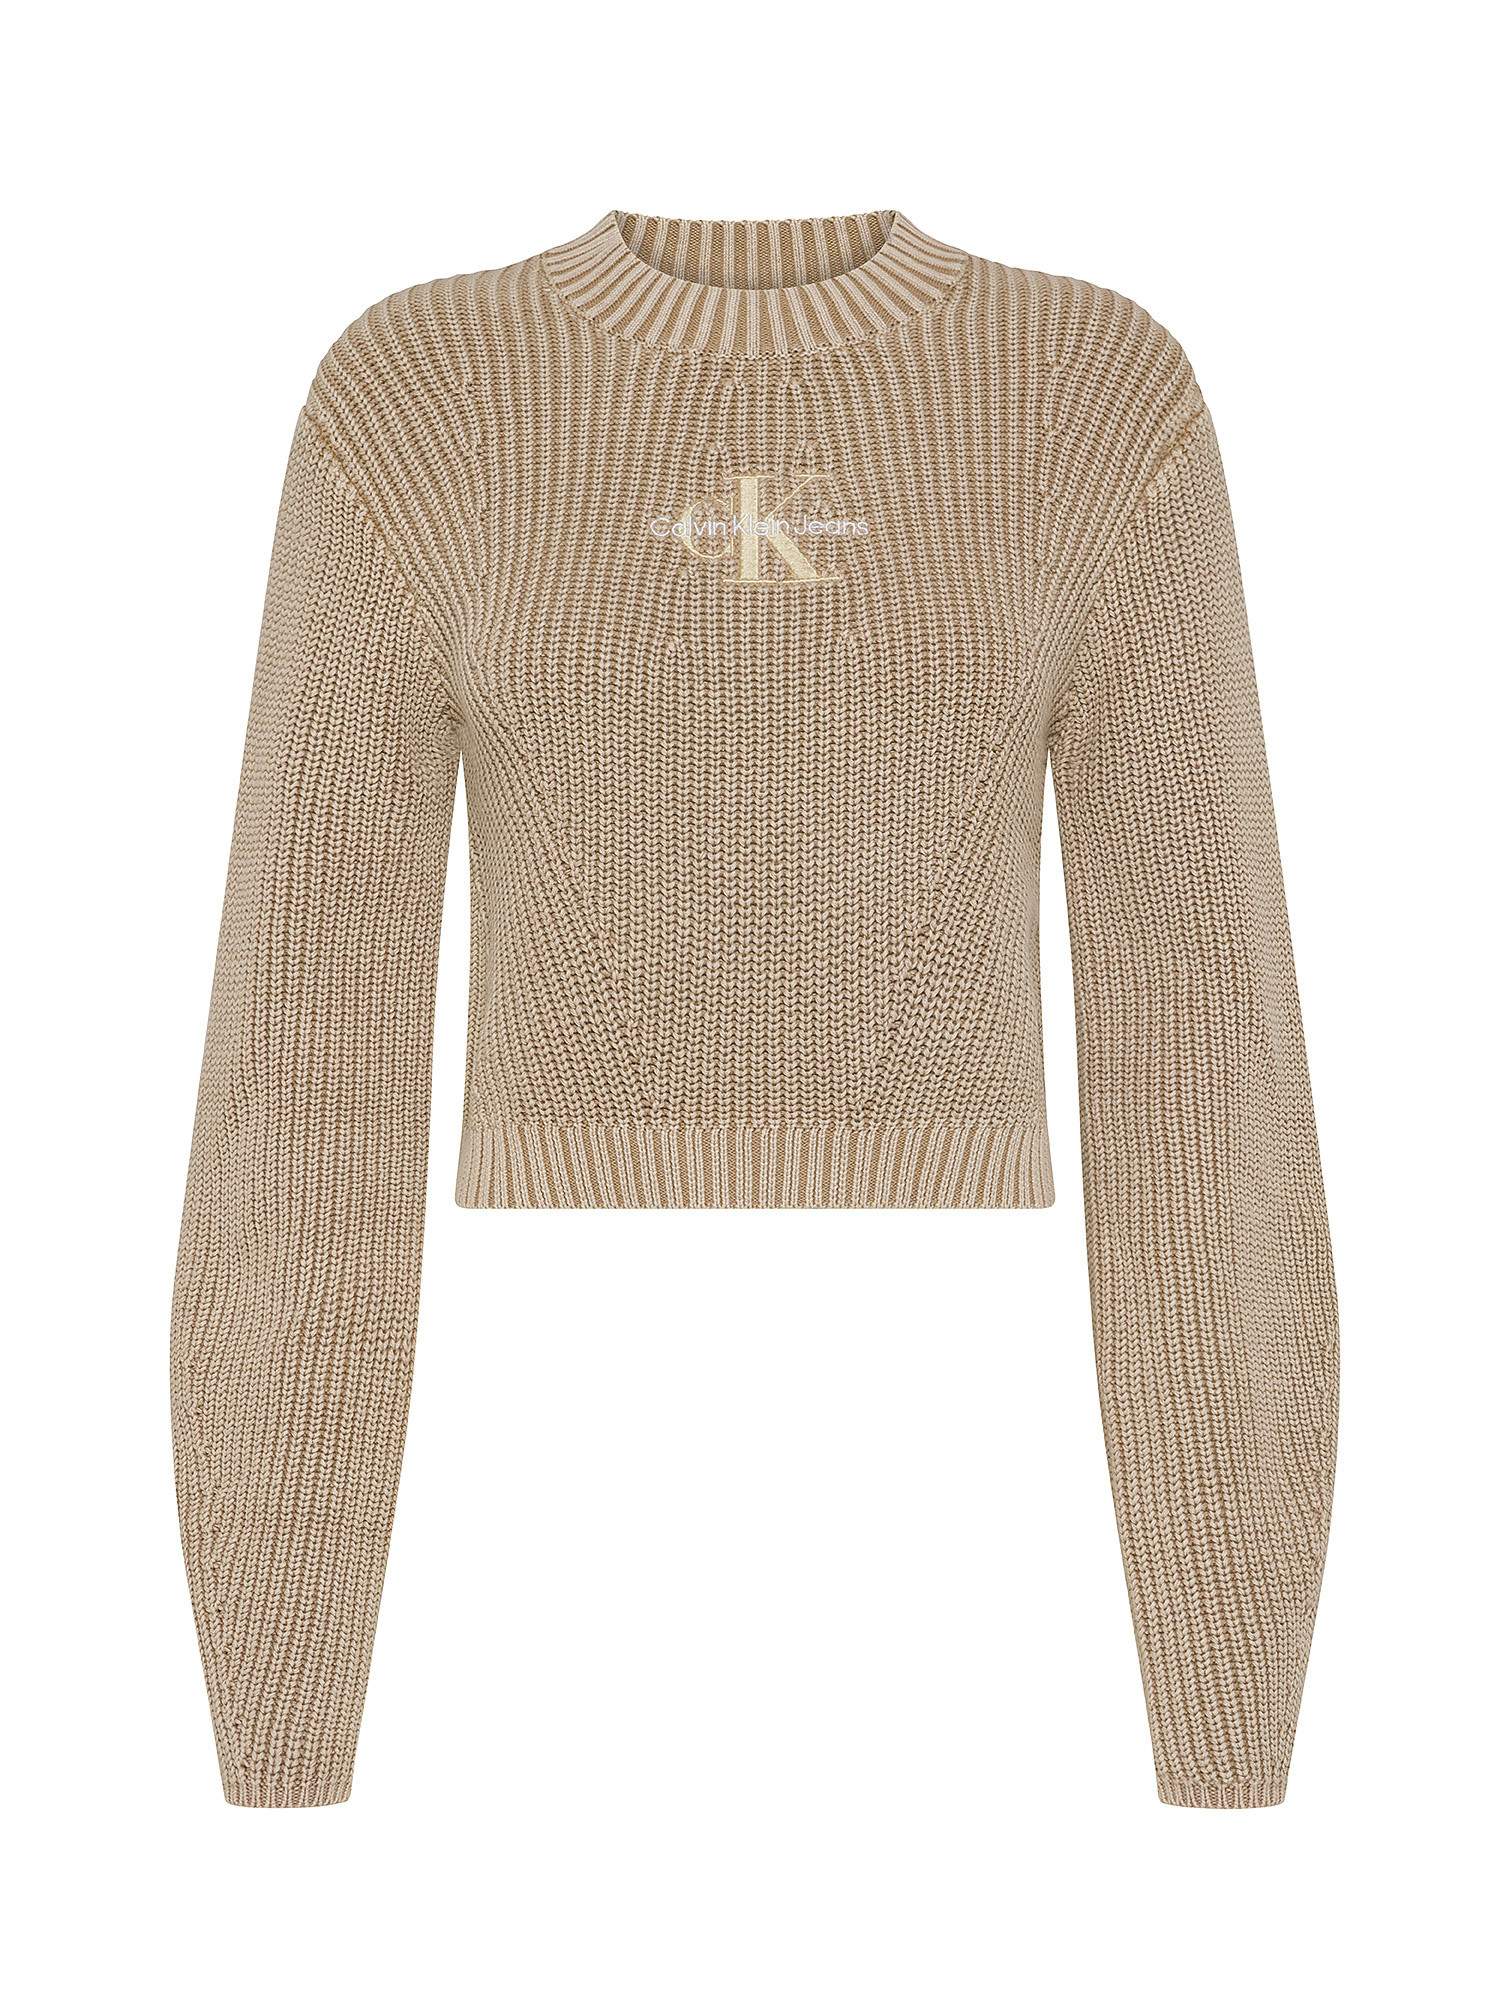 Calvin Klein Jeans - Crew neck cotton sweater with logo, Beige, large image number 0